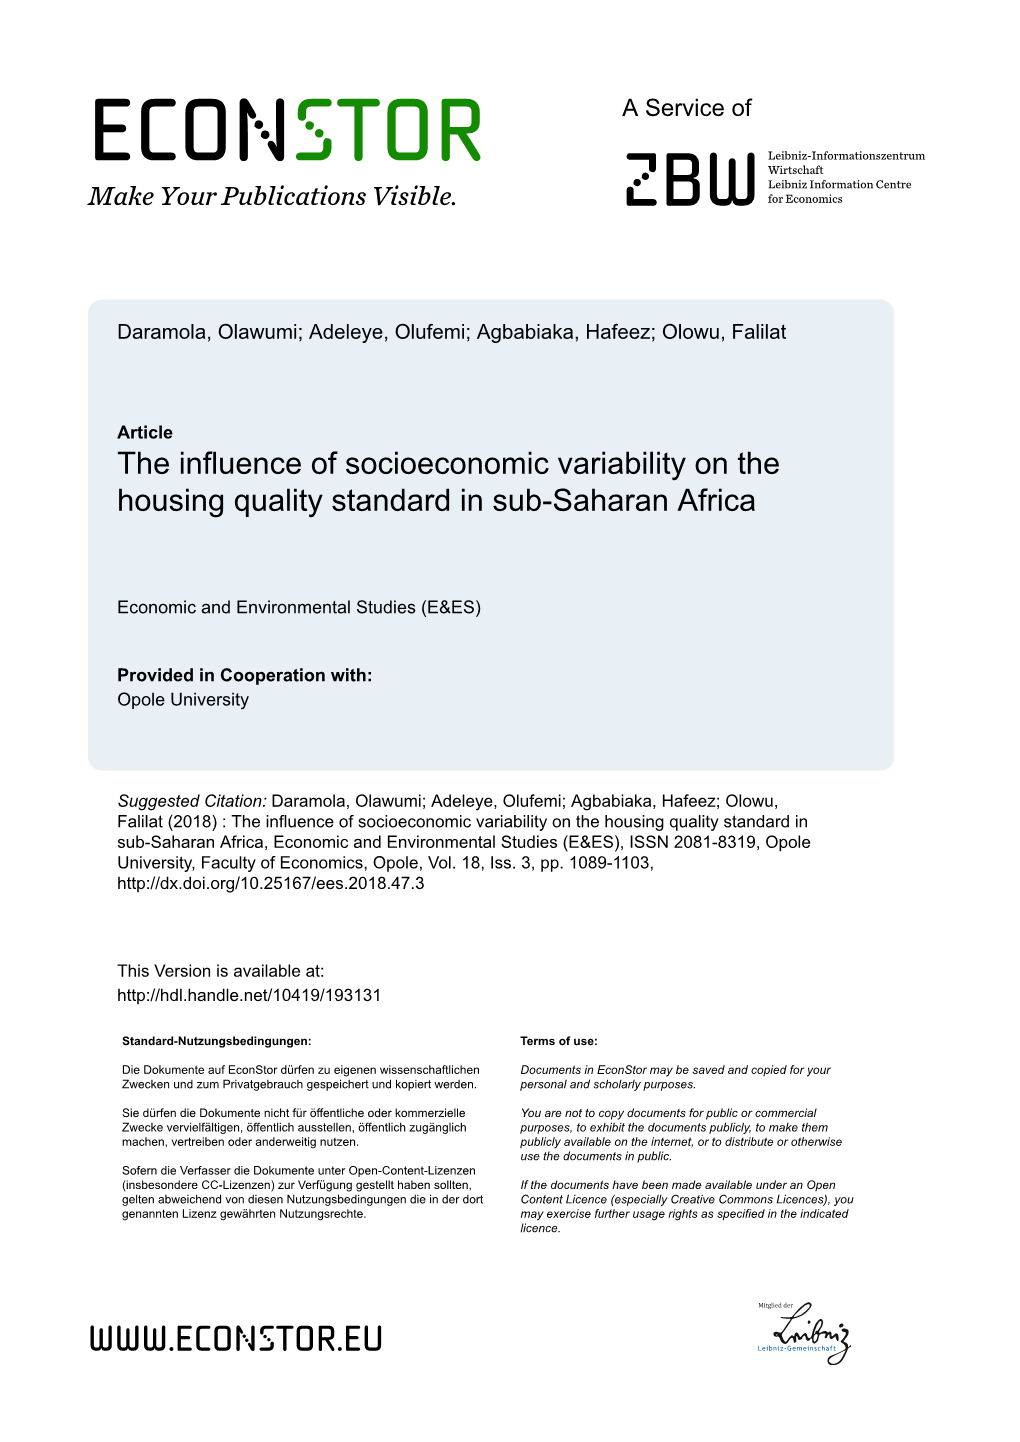 The Influence of Socioeconomic Variability on the Housing Quality Standard in Sub-Saharan Africa